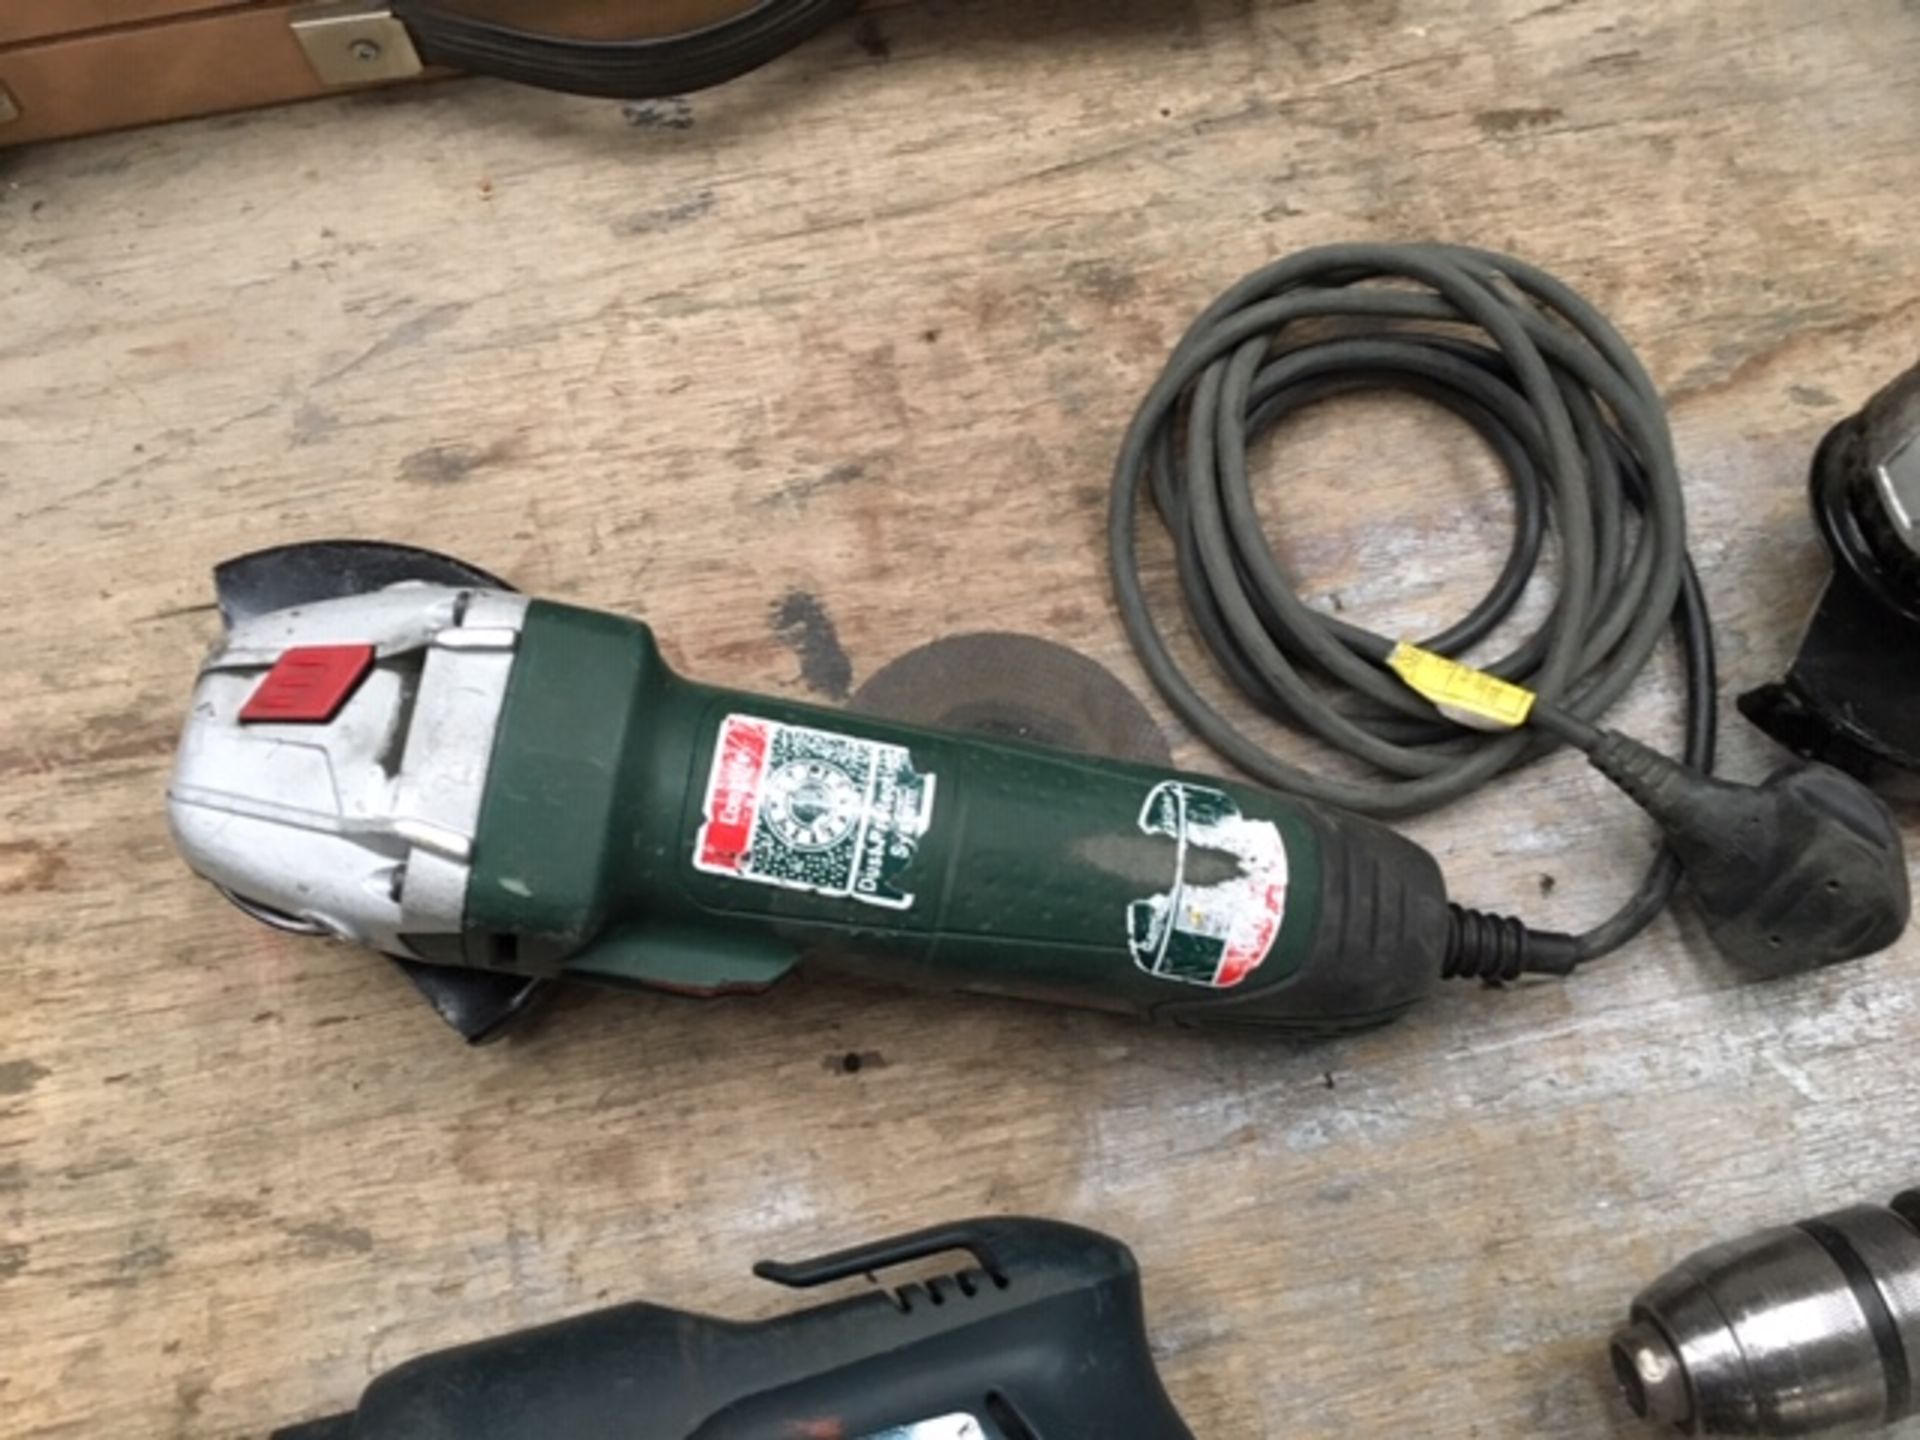 Bosch PWS7-115 Angle Grinder